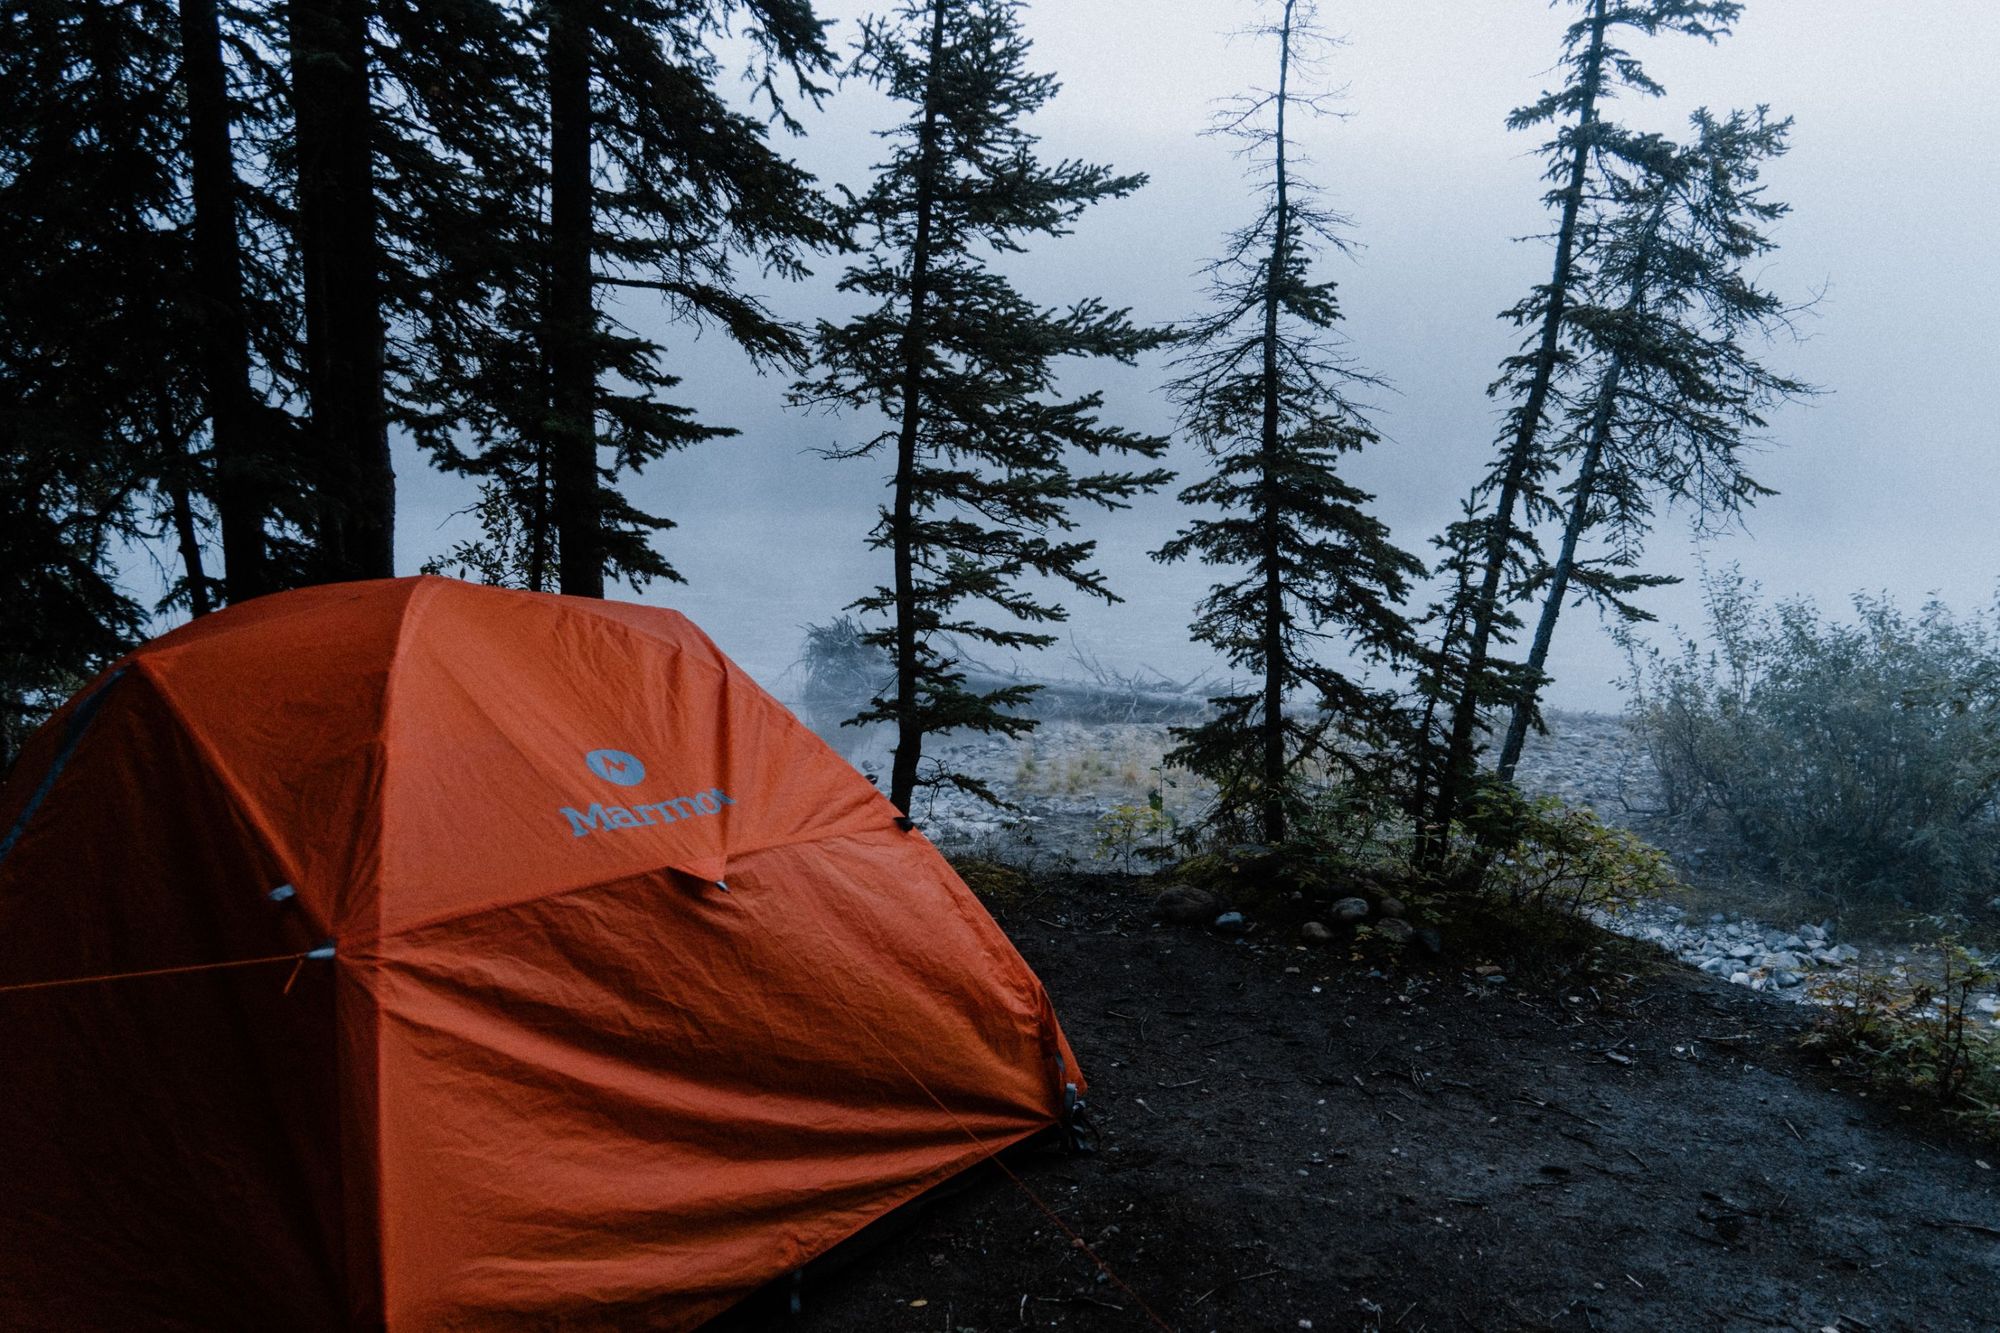 A tent under the shelter of spruce trees in the Yukon, Canada